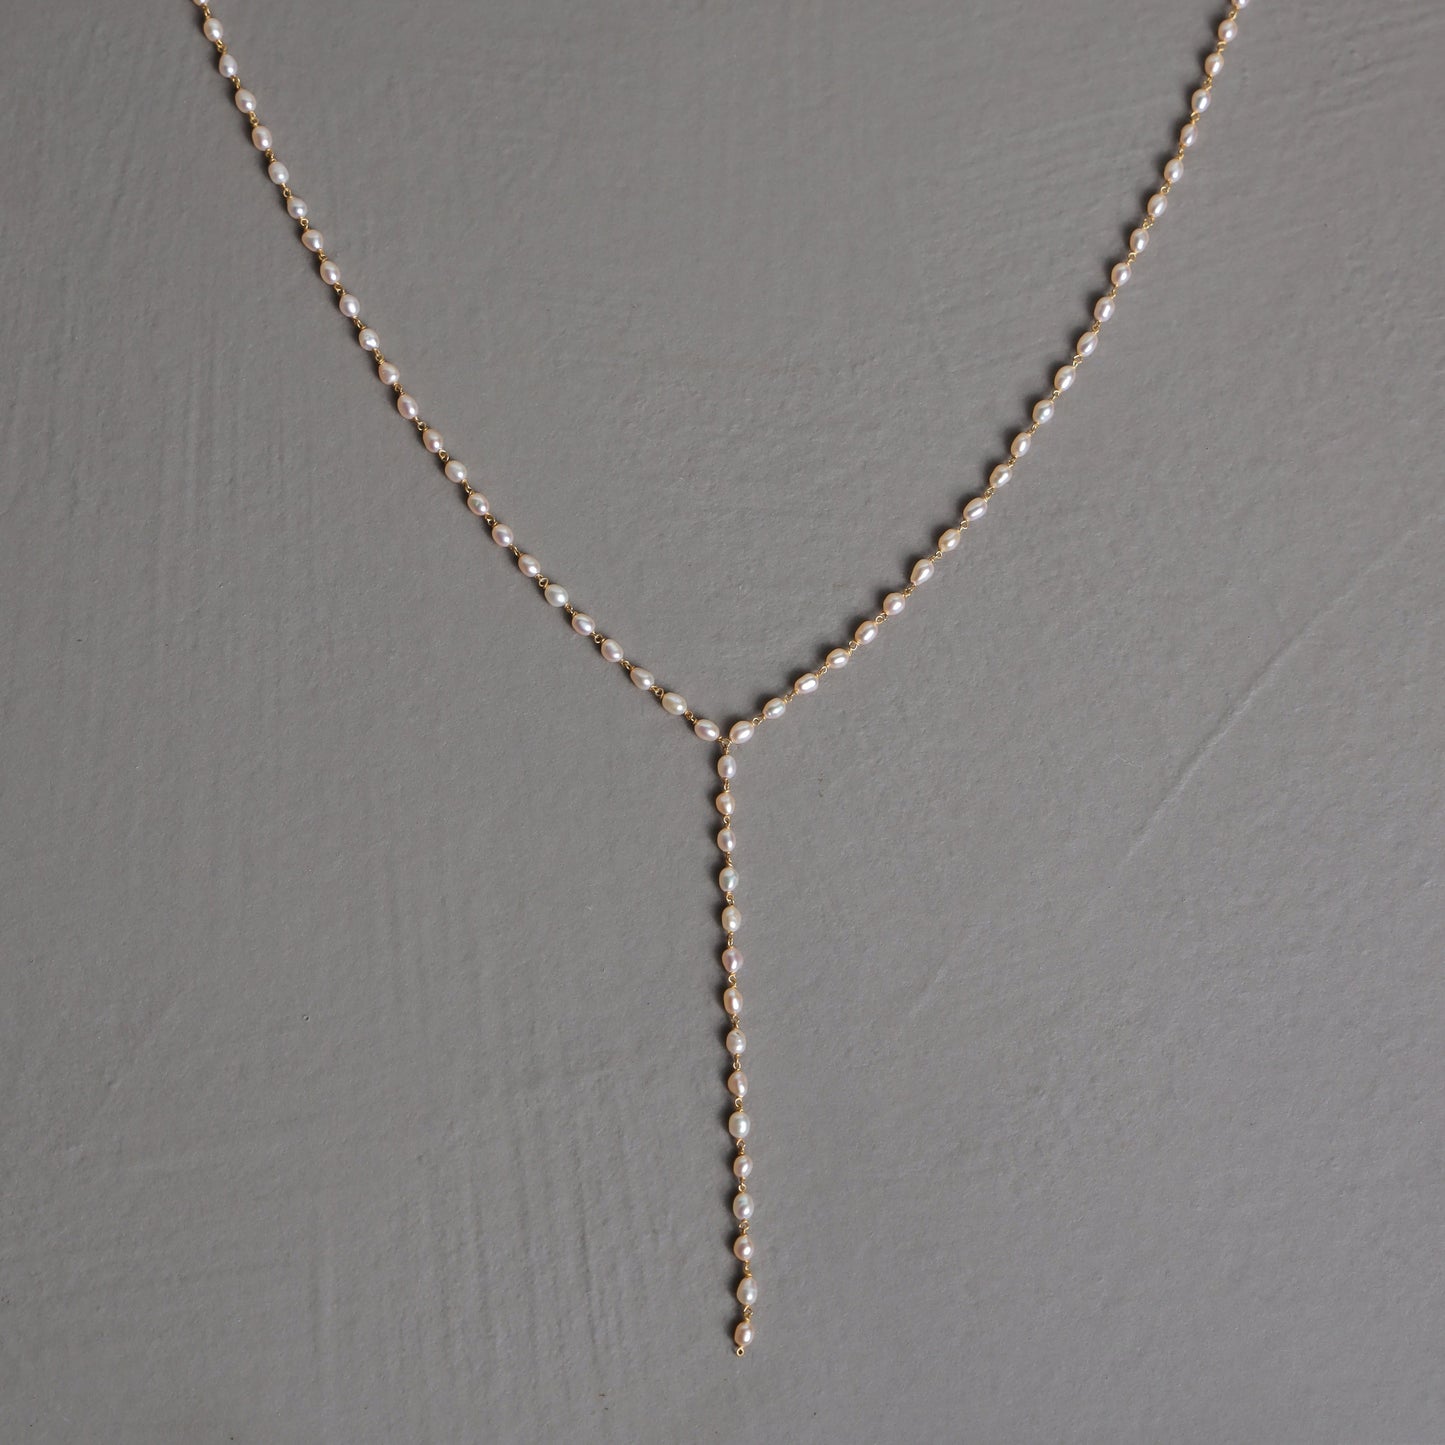 Pearlie Lariat Necklace